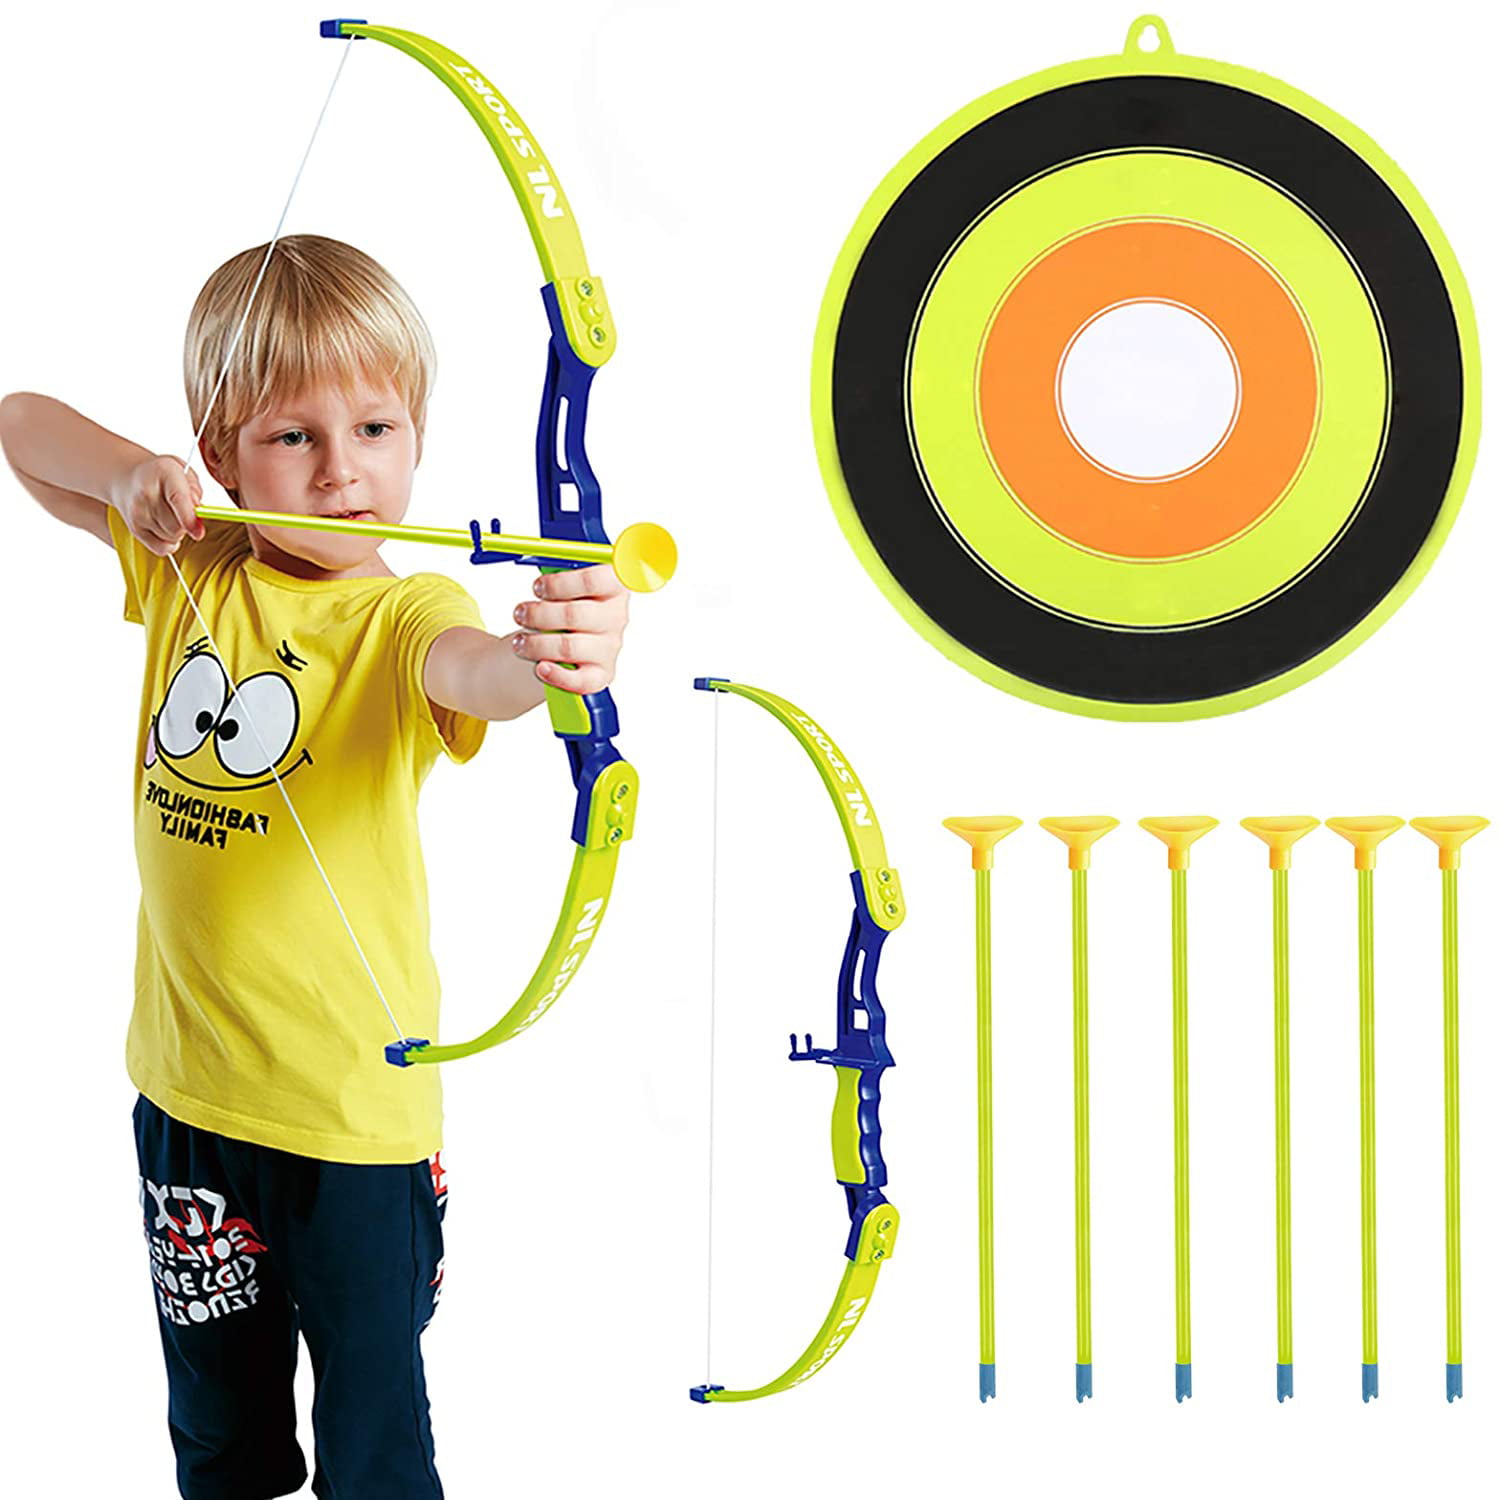 2 Set Archery Bow and Arrow Toys Useful Durable Archery Game for Children 